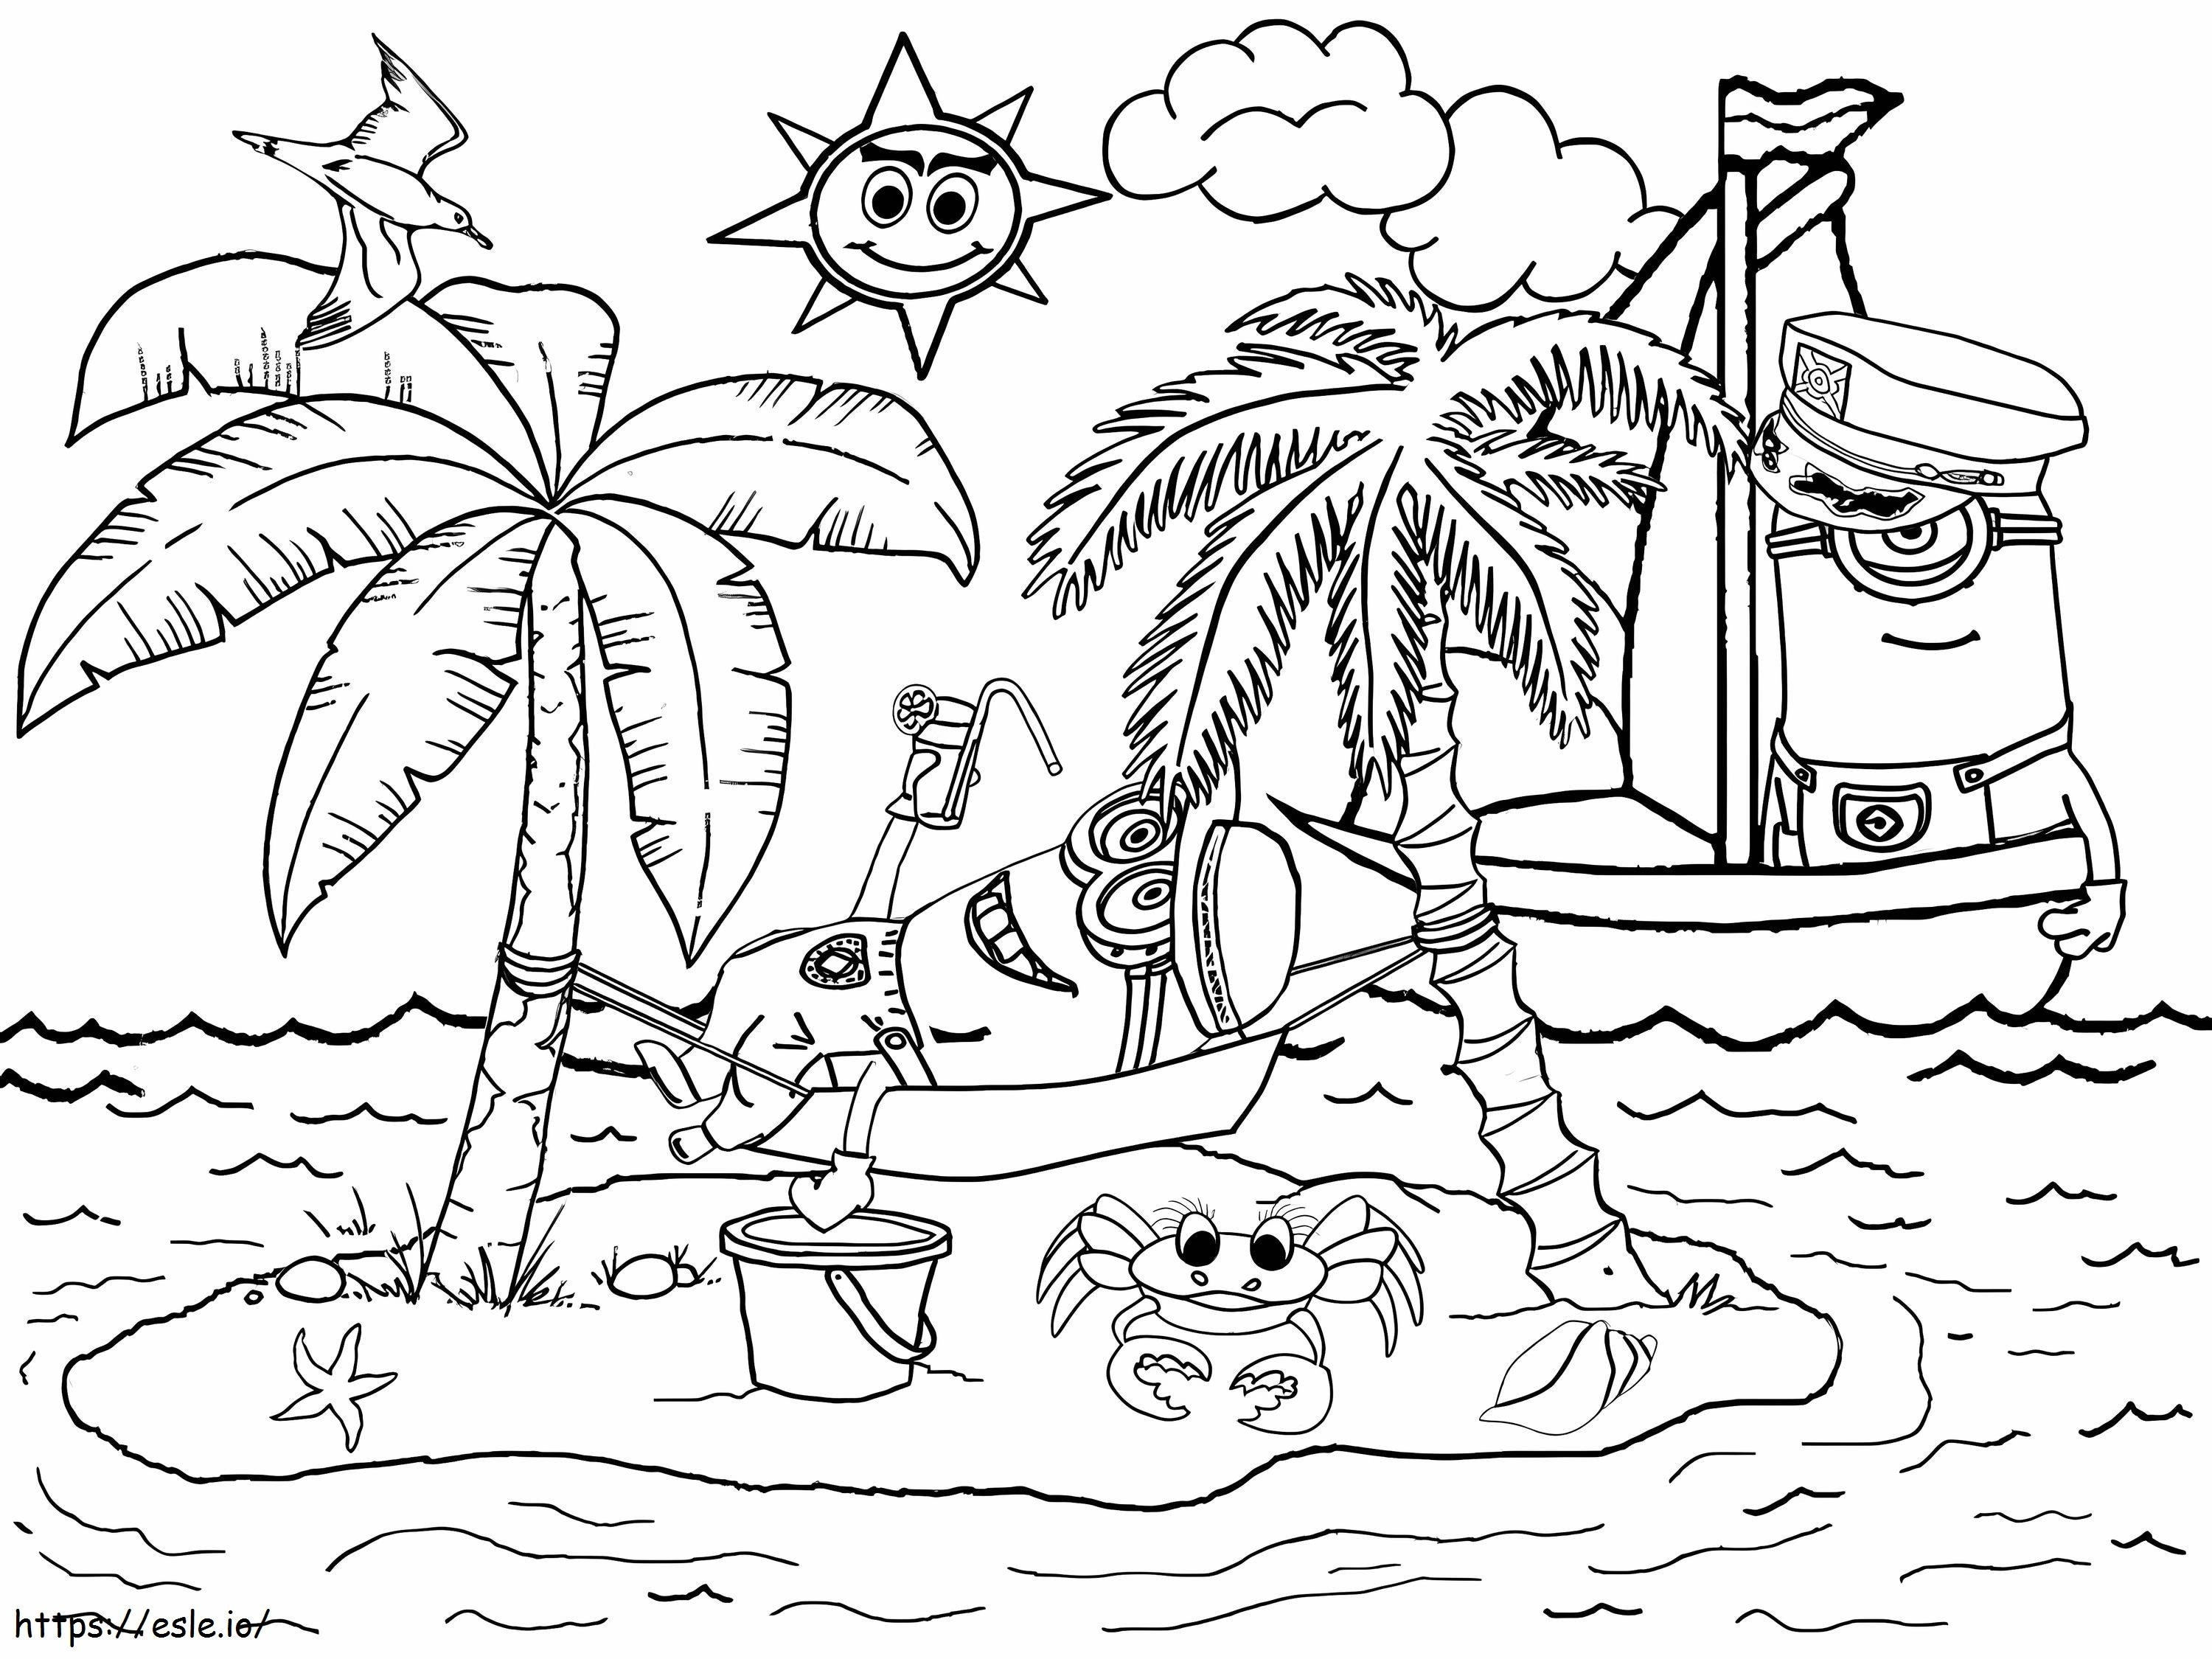 Minions On The Beach coloring page